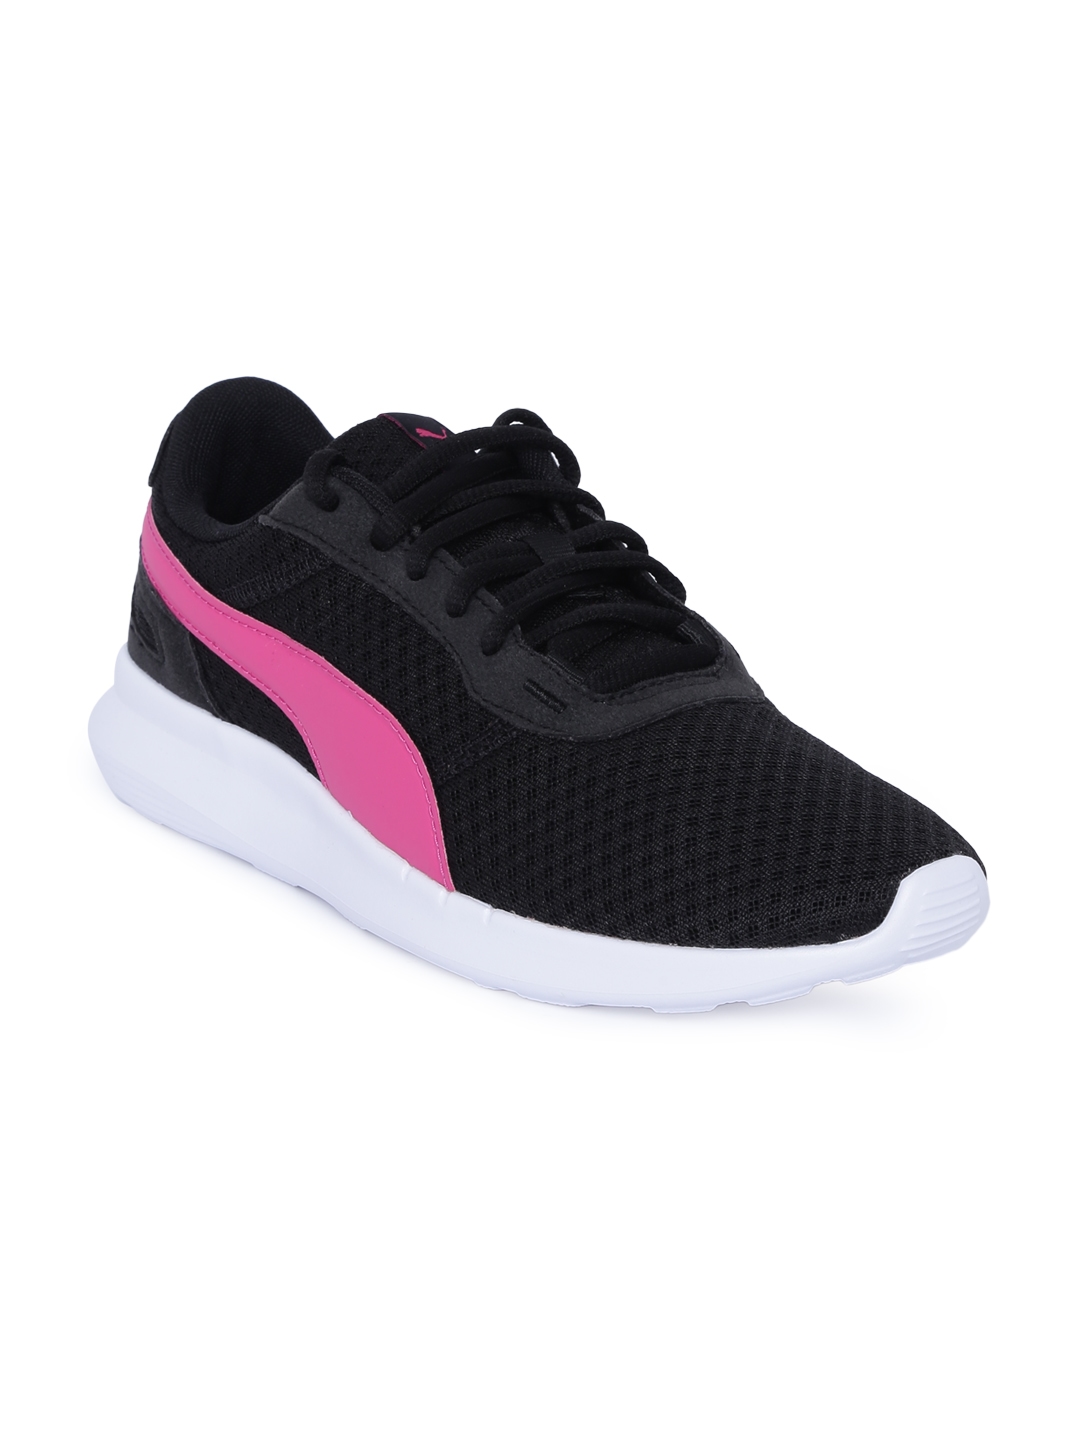 puma sports shoes for girls